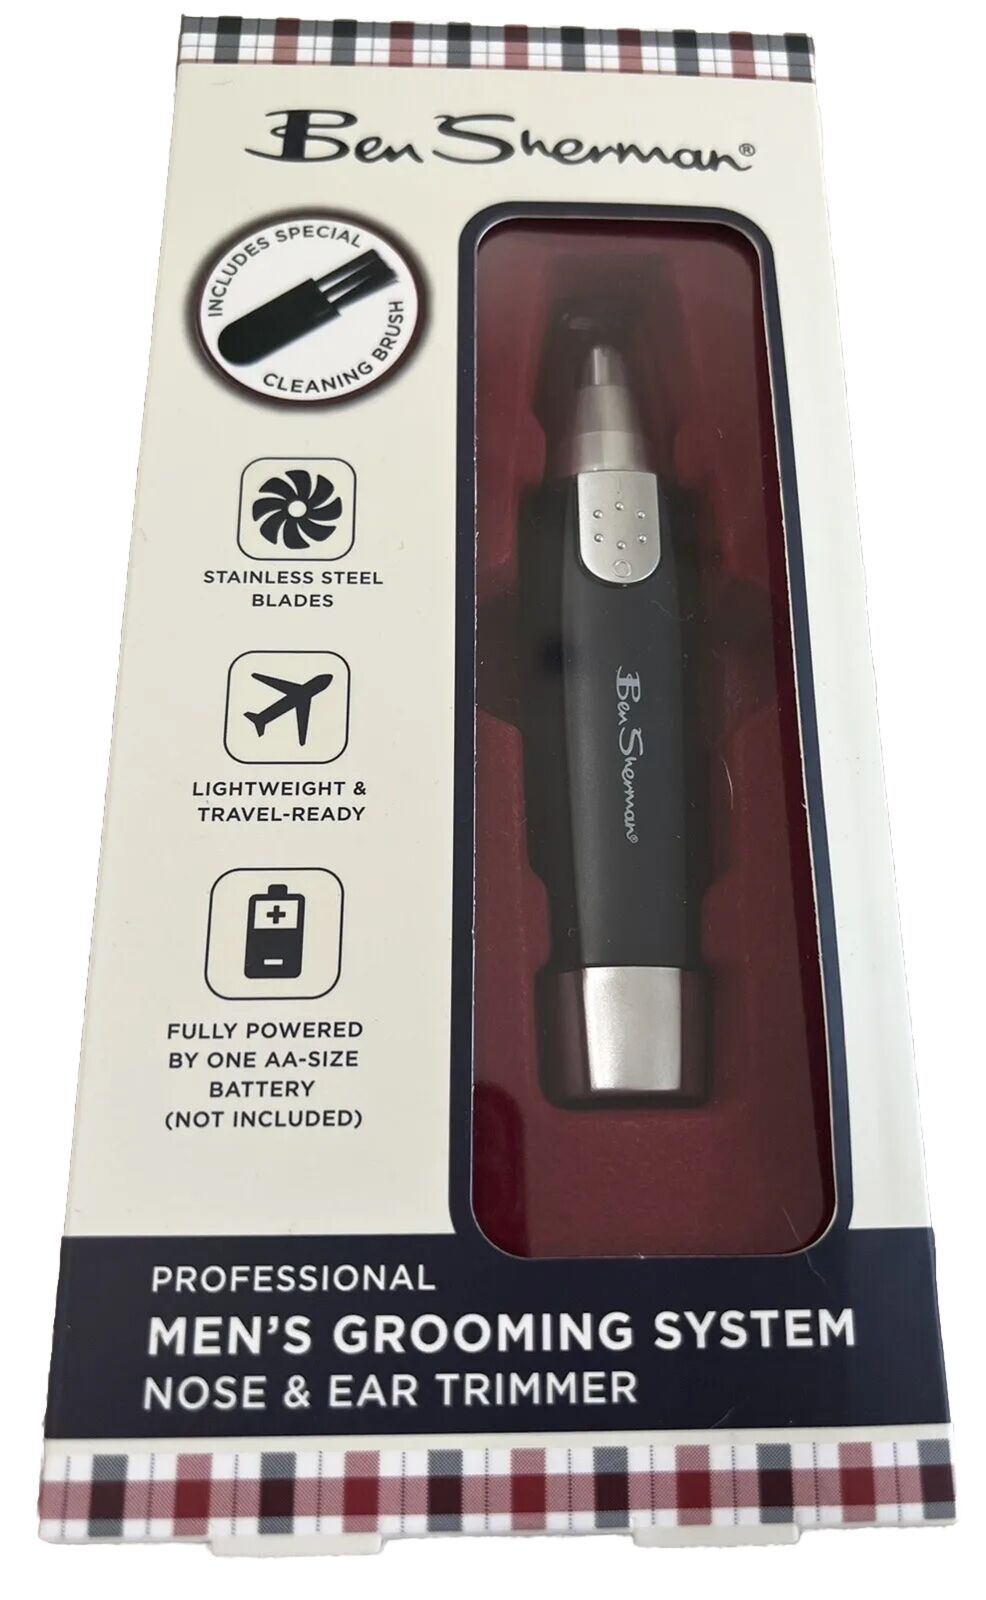 Ben Sherman Nose & Ear Trimmer Men’s Grooming. New In Box. Great Gift Idea